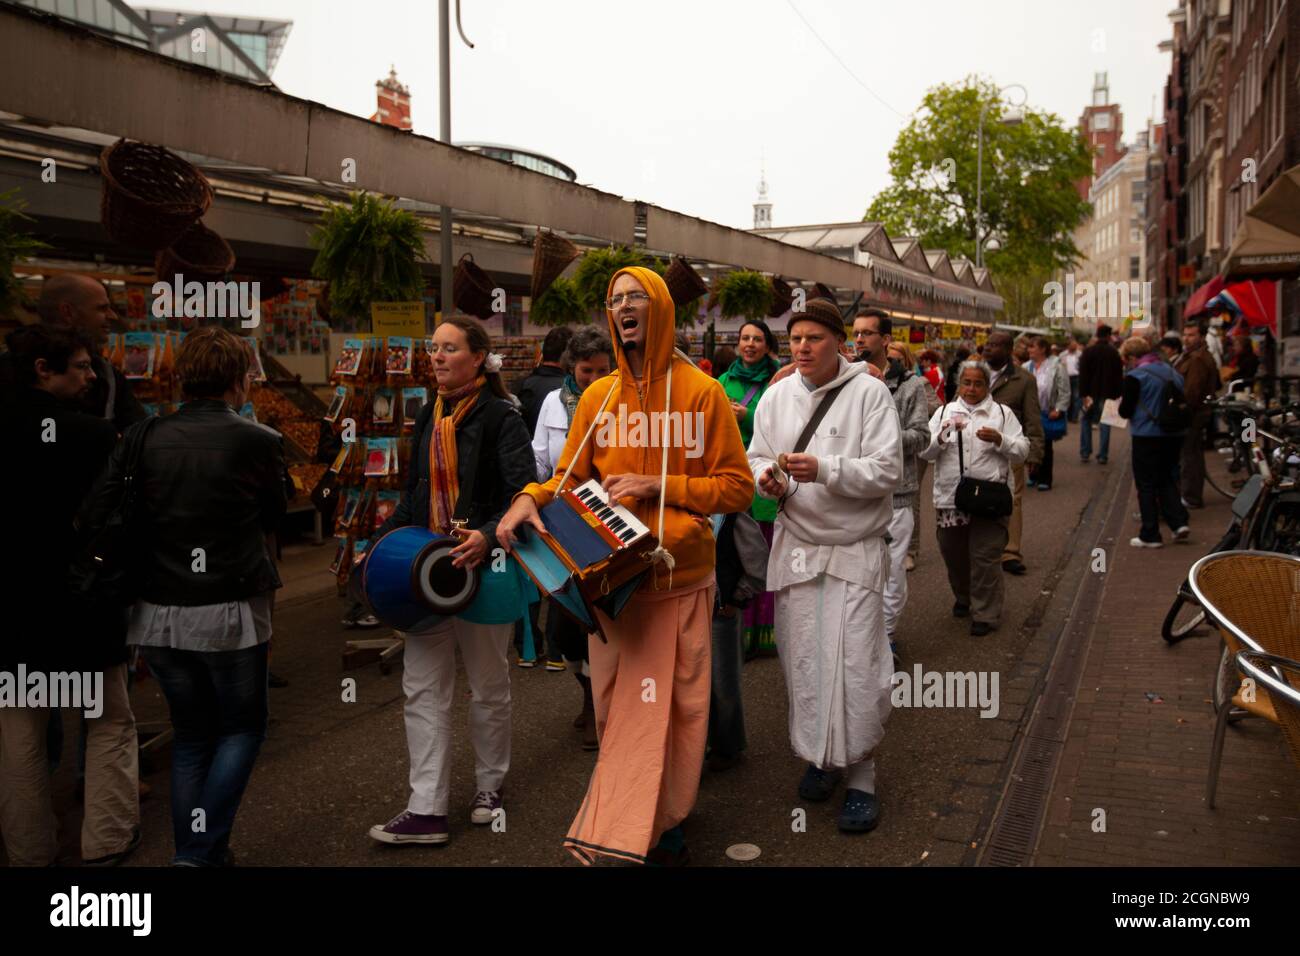 Amsterdam, Netherlands 05/15/2010: A local religious community is doing a parade. Members are wearing robes and playing musical instruments as they wa Stock Photo